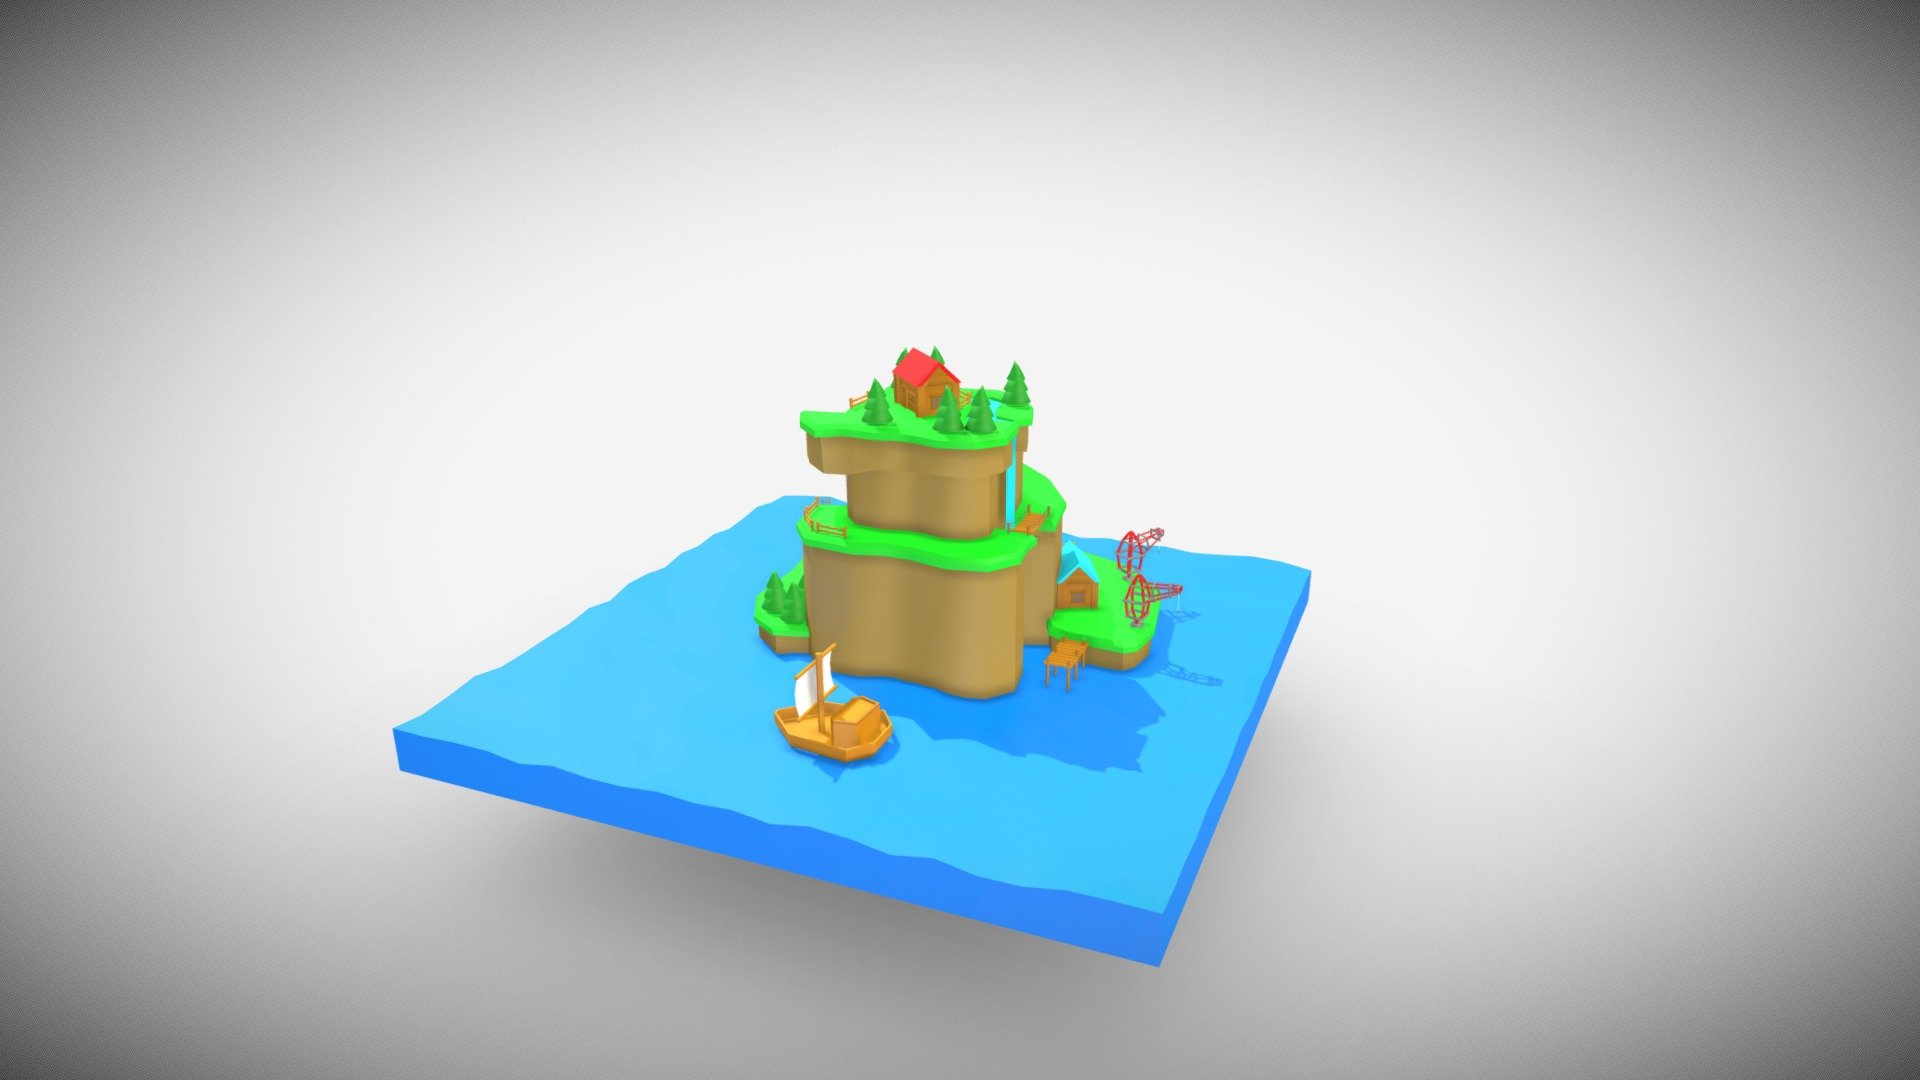 Low poly Island Diorama 10 colors palette. Ship, Houses, trees, bridge and water.

https://www.instagram.com/project_als/ - Cartoon Island Diorama - Download Free 3D model by Als12 3d model